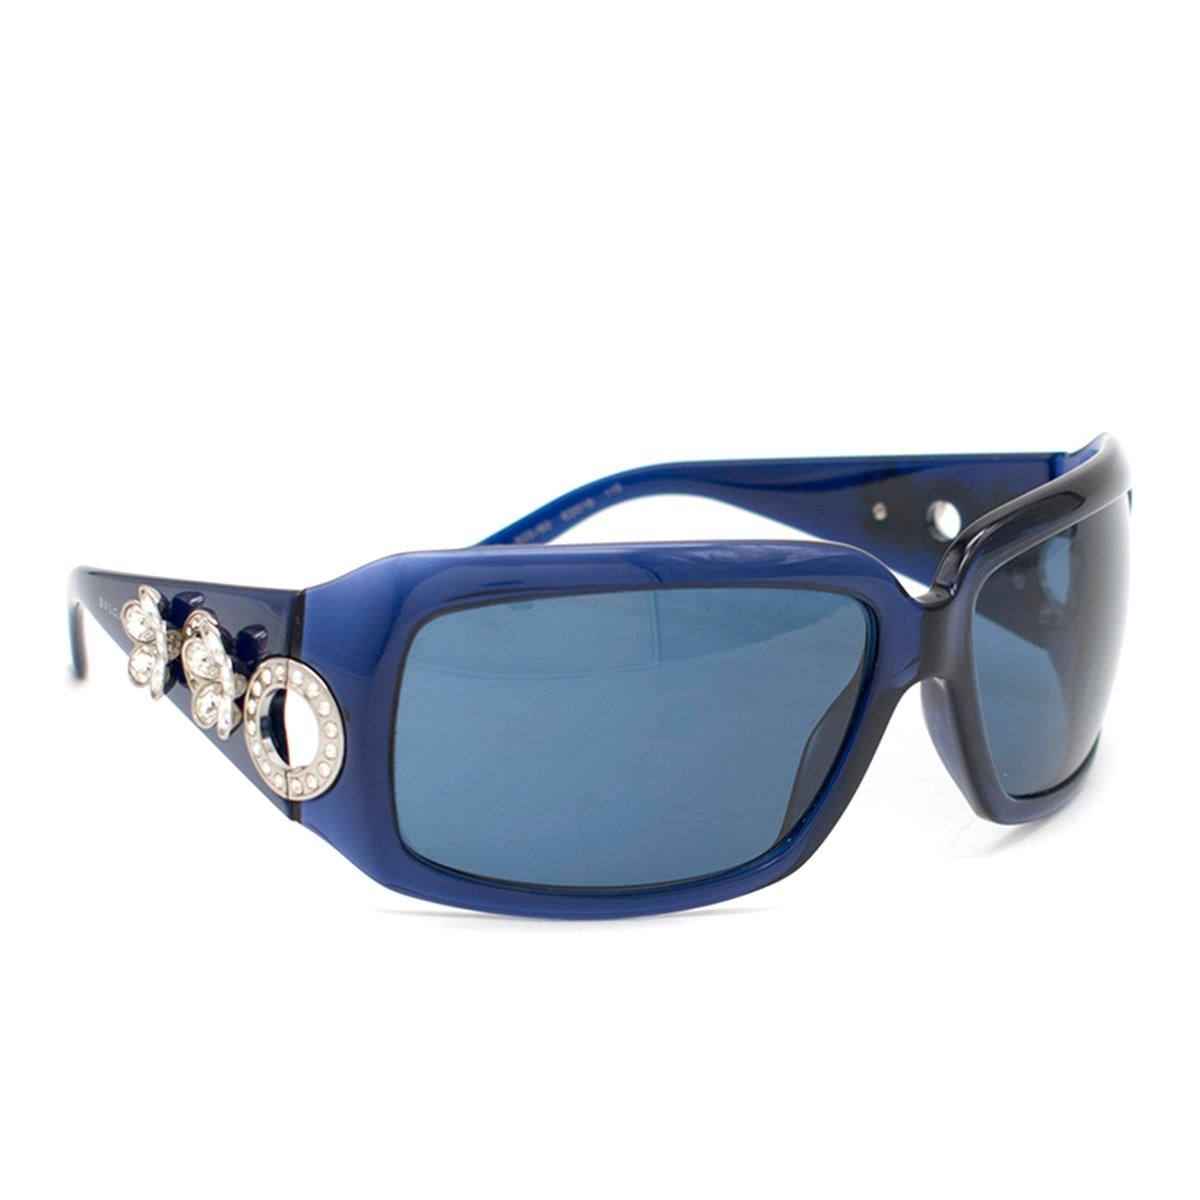 Bvlgari Blue Swarovski Crystal Embellished Sunglasses

-Blue, acetate
-Swarovski crystal embellishment 
-Rectangular frames
-Blue tint
-Off-brand case included

Please note, these items are pre-owned and may show some signs of storage, even when